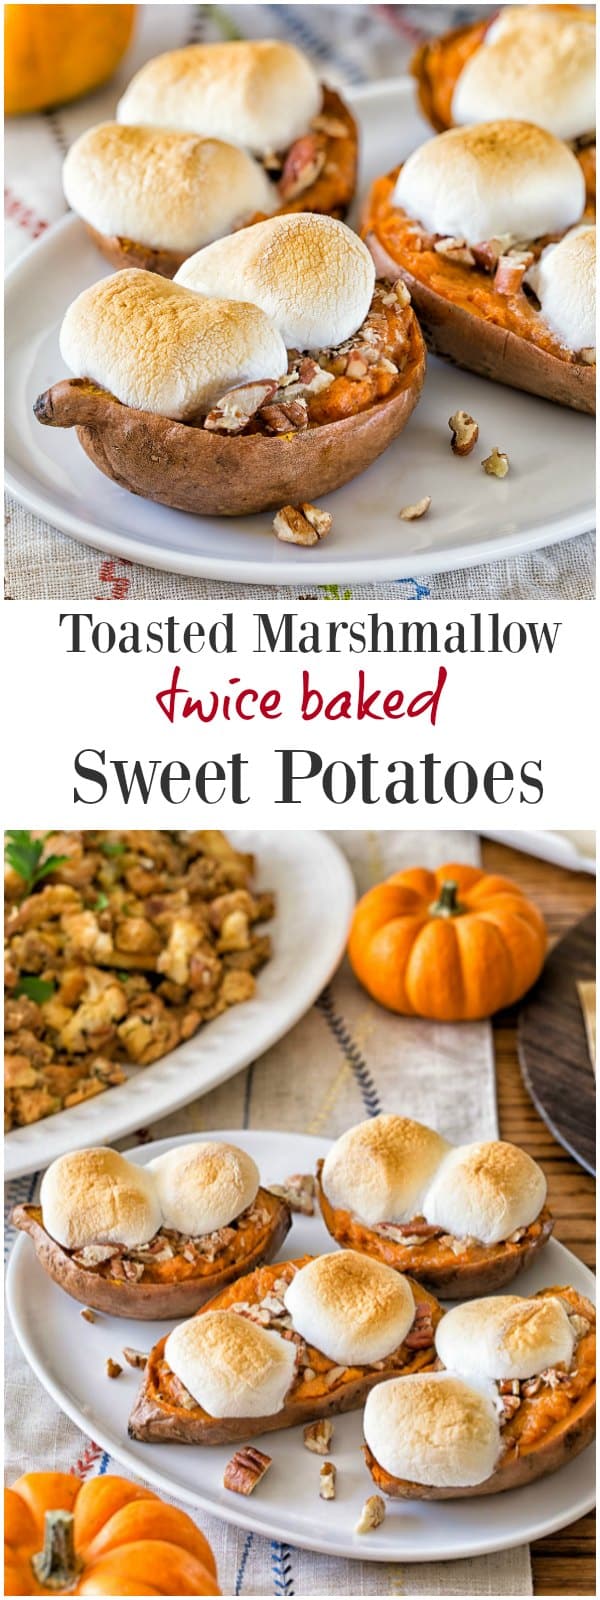 Toasted marshmallow twice baked sweet potatoes- an easy make ahead side dish for Thanksgiving. It's quite a crowd-pleaser too!